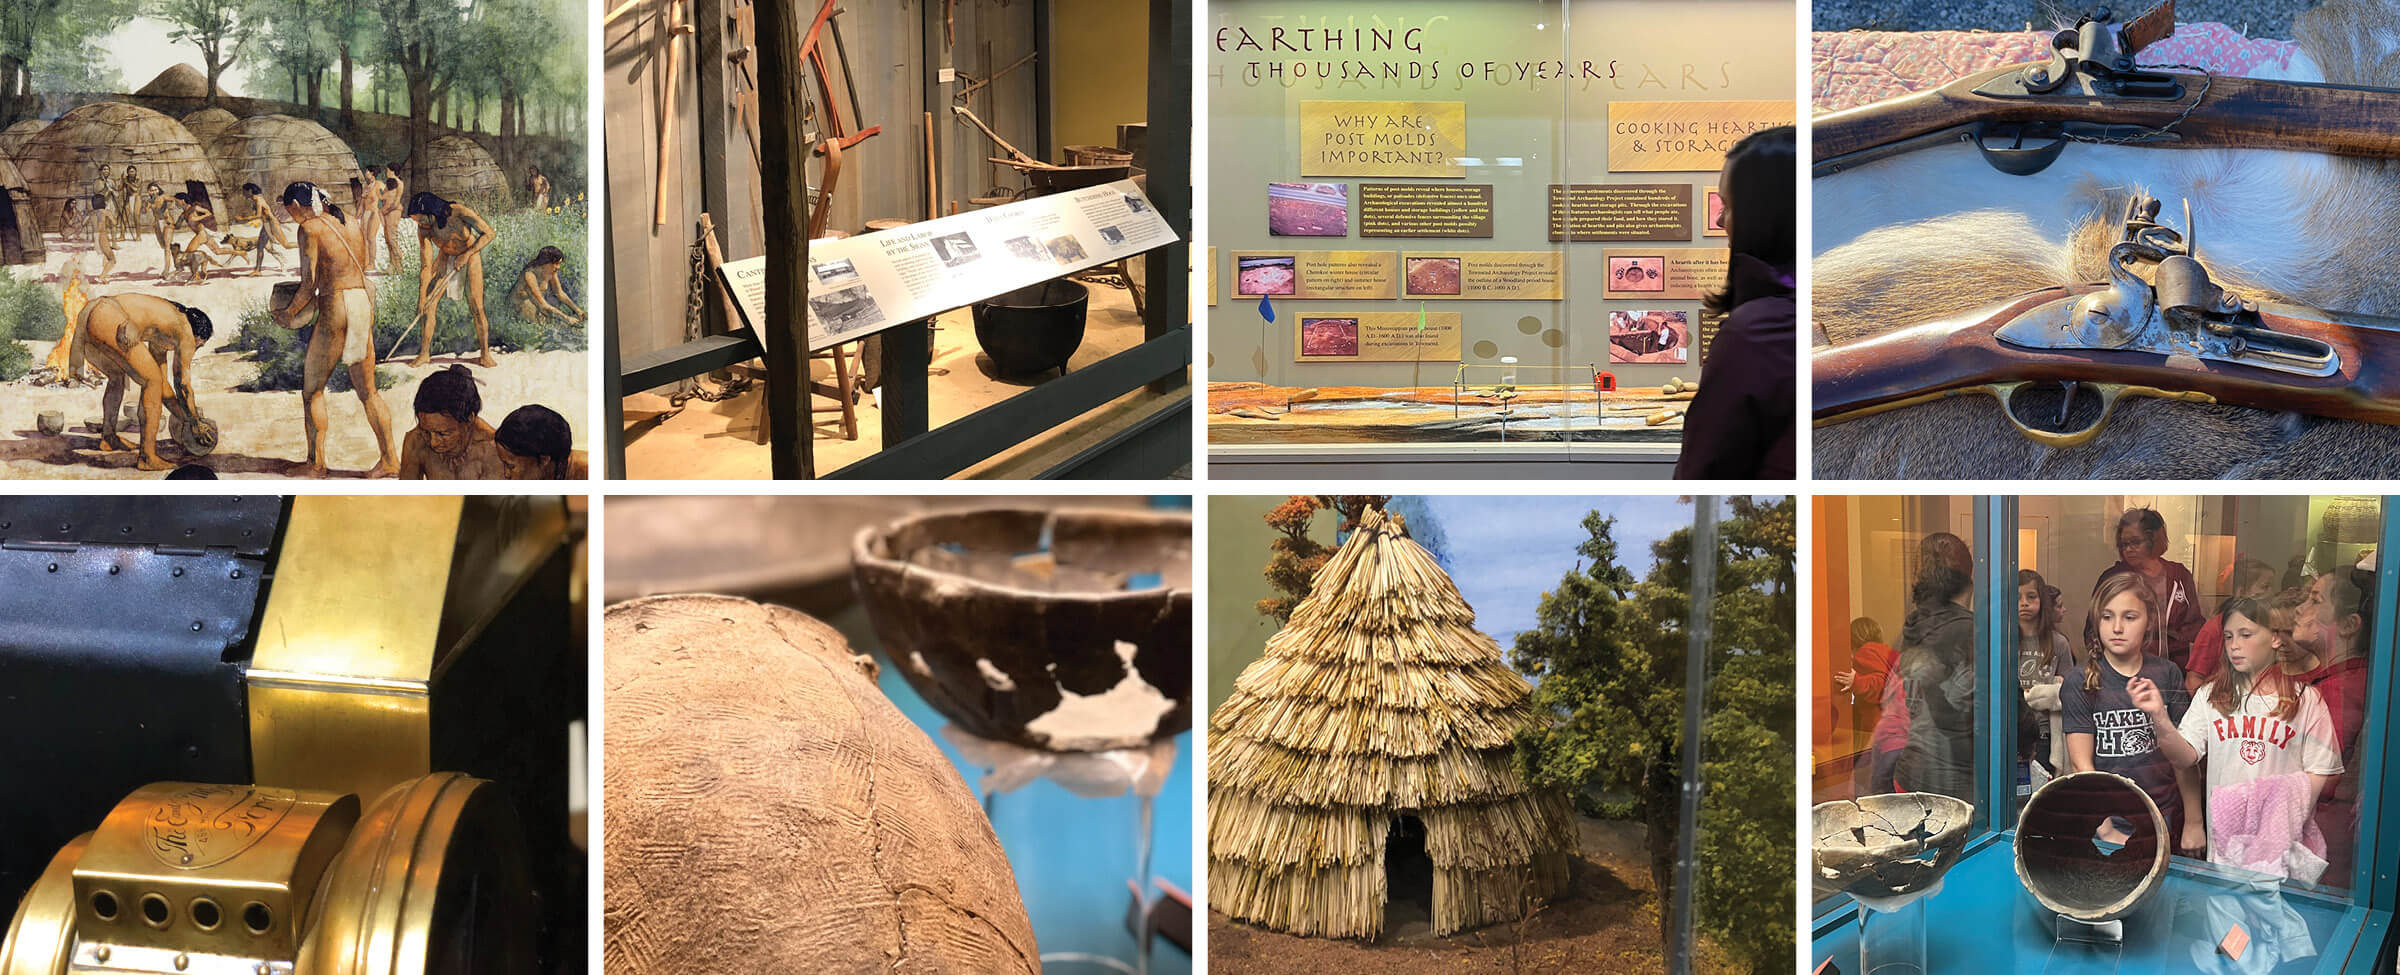 Composite of various images at the Great Smoky Mountain Heritage Center